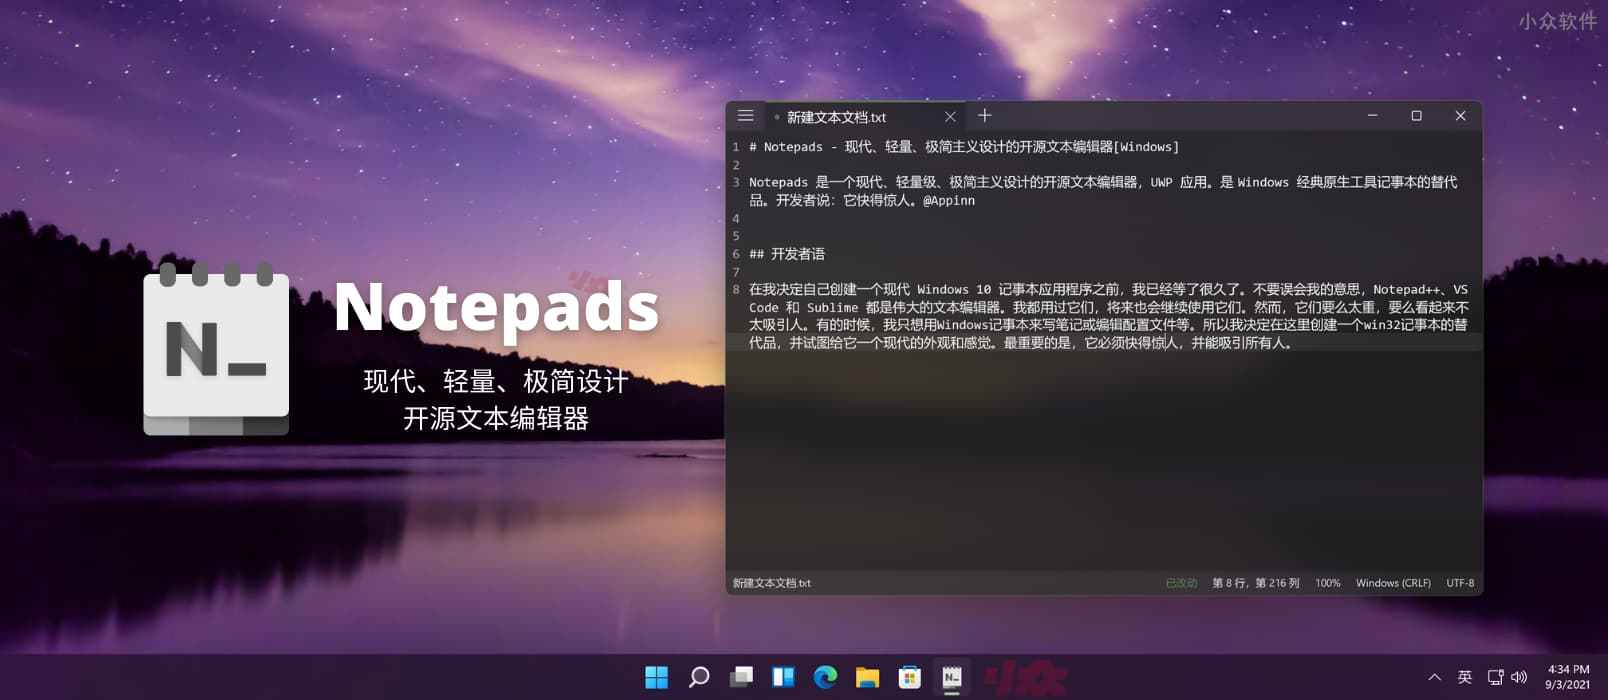 Notepads - 现代、轻量、极简主义设计的开源文本编辑器[Windows]